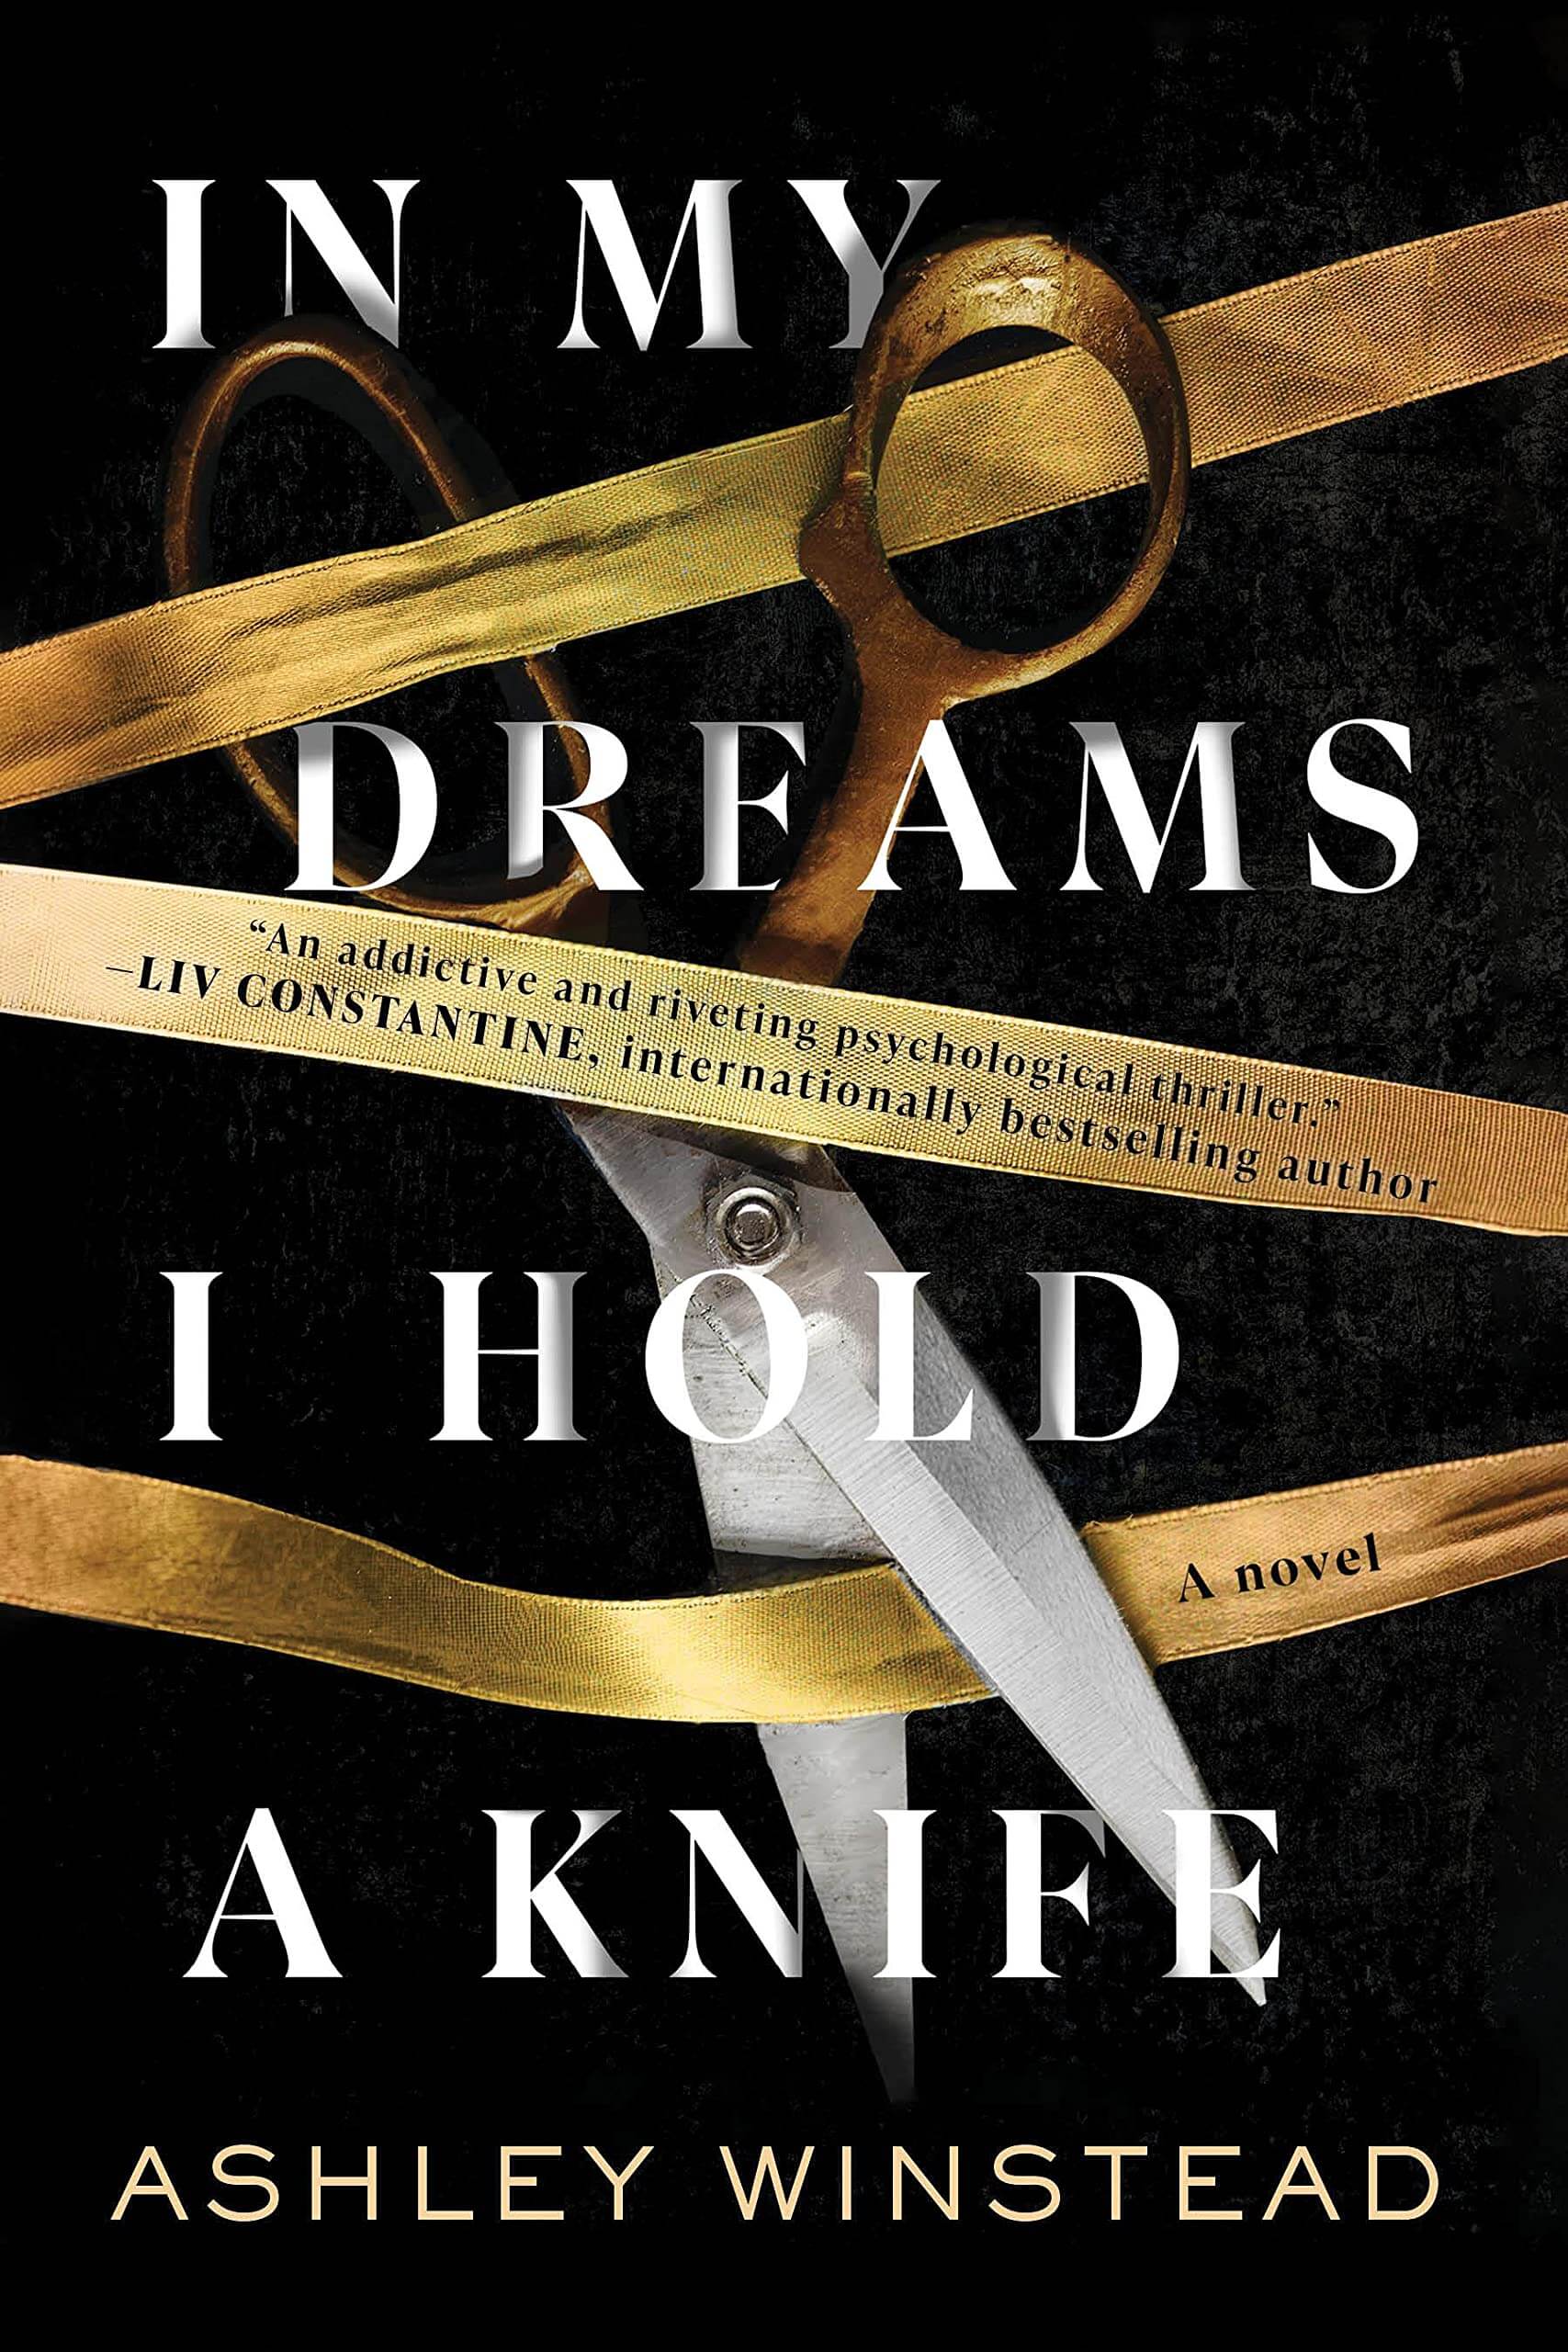 Cover of In My Dreams I Hold a Knife by Ashley Winstead